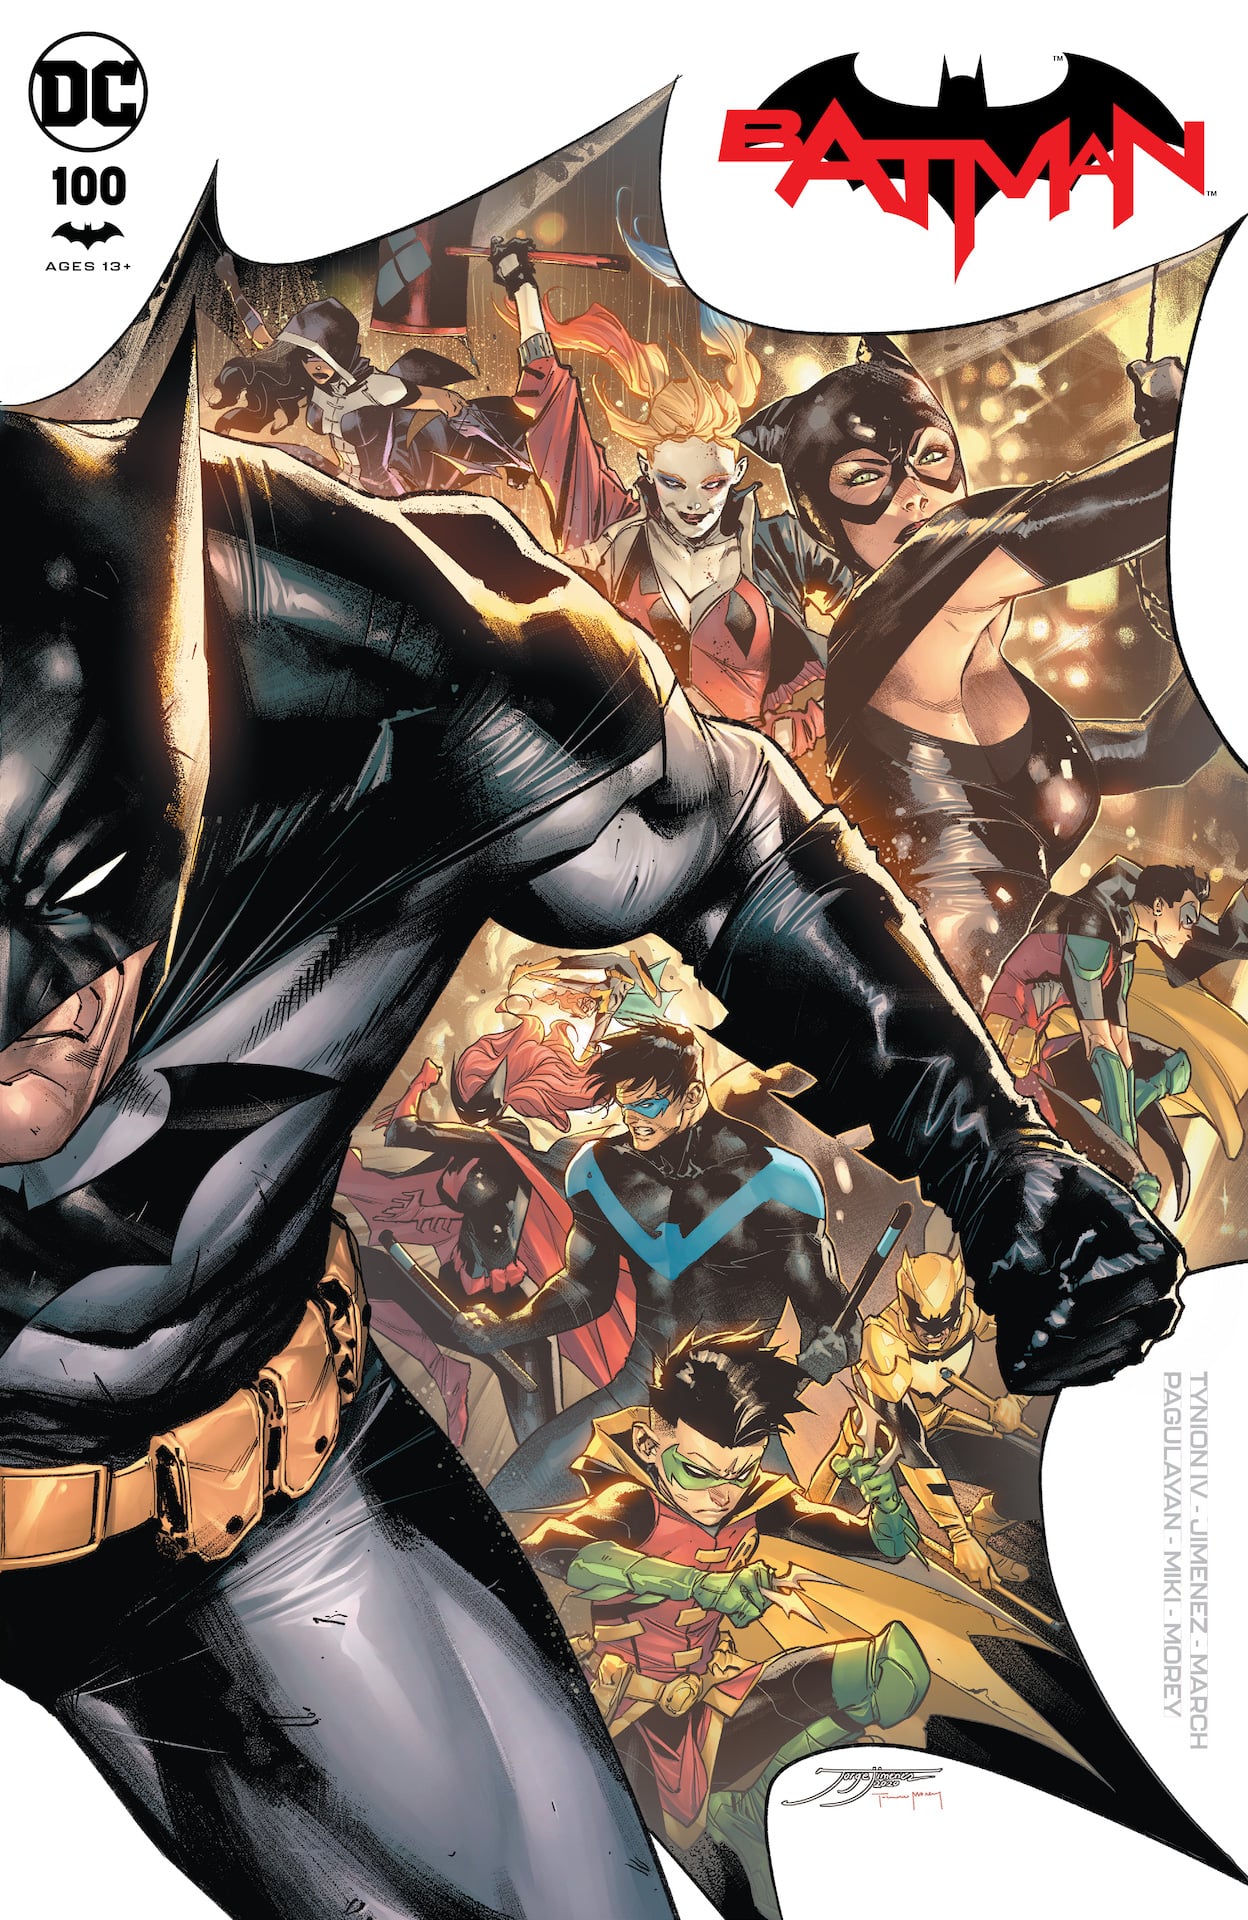 DC Preview: Batman #100 - A fight 80 years in the making